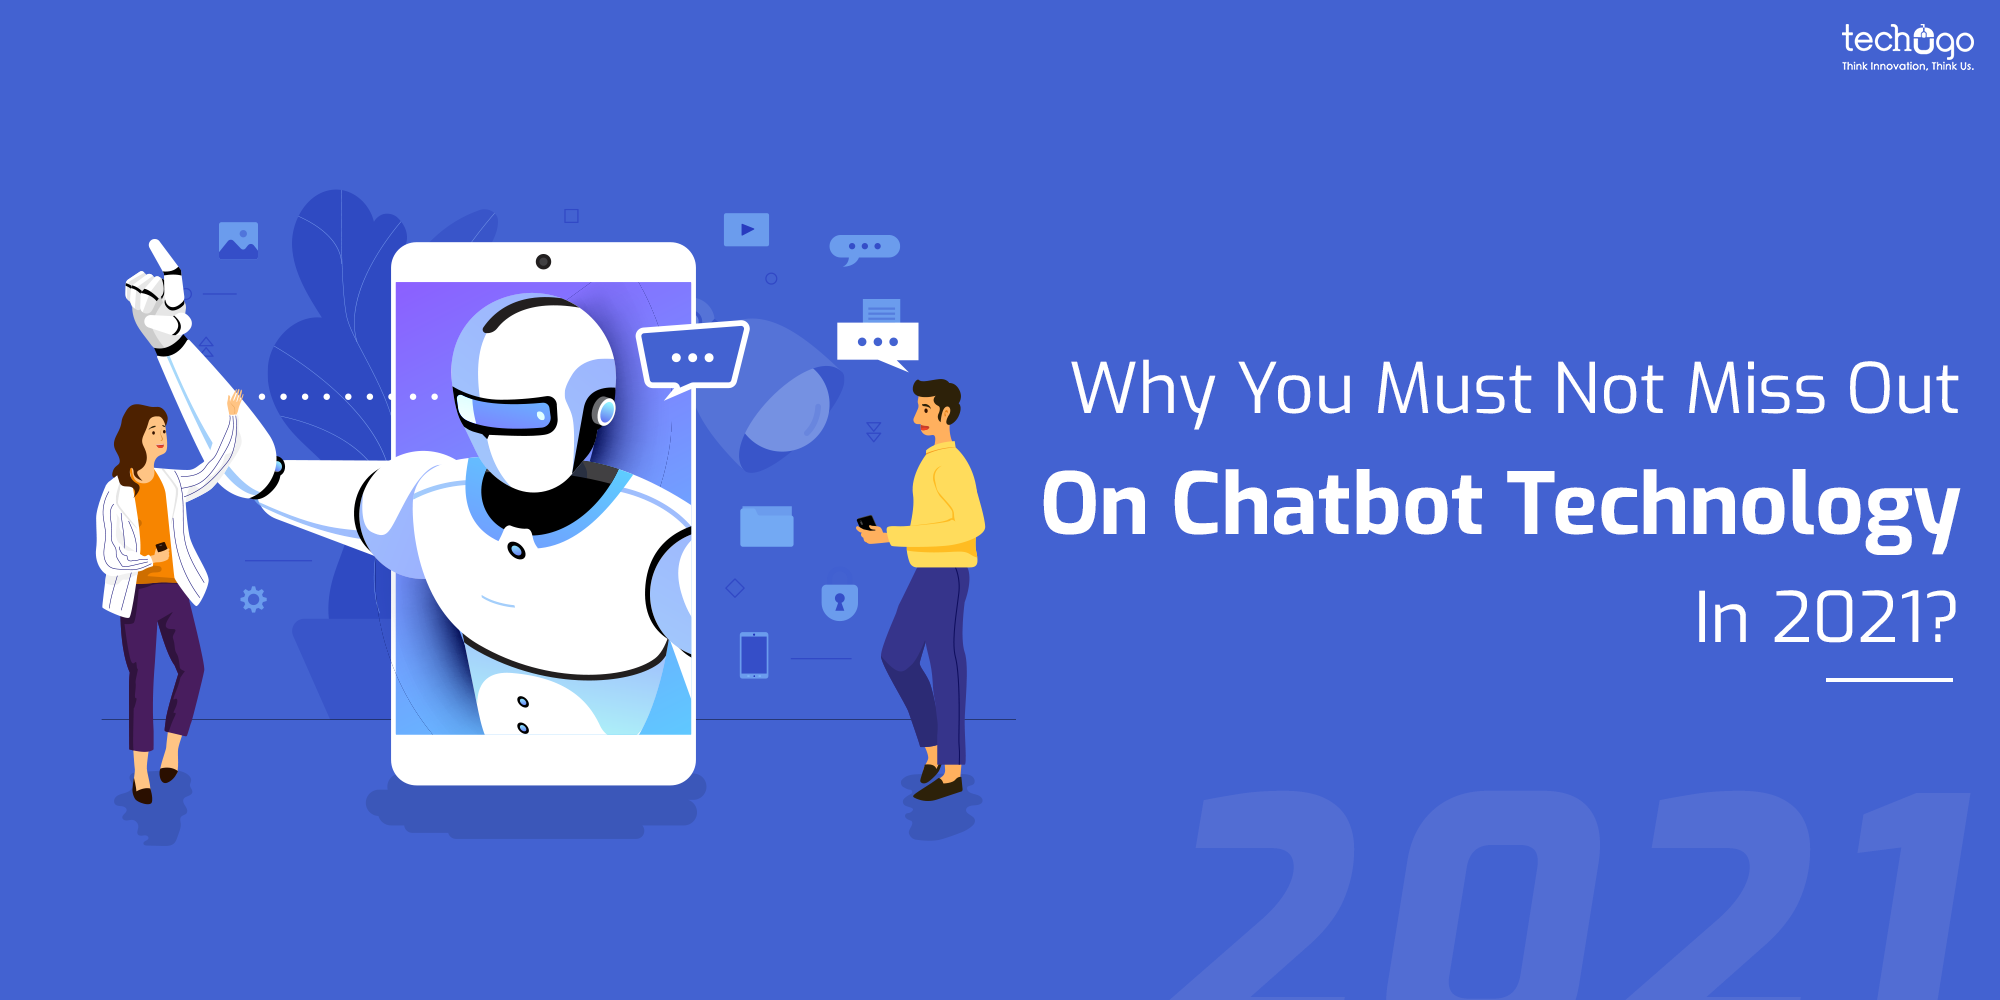 Why You Must Not Miss Out On Chatbot Technology In 2021